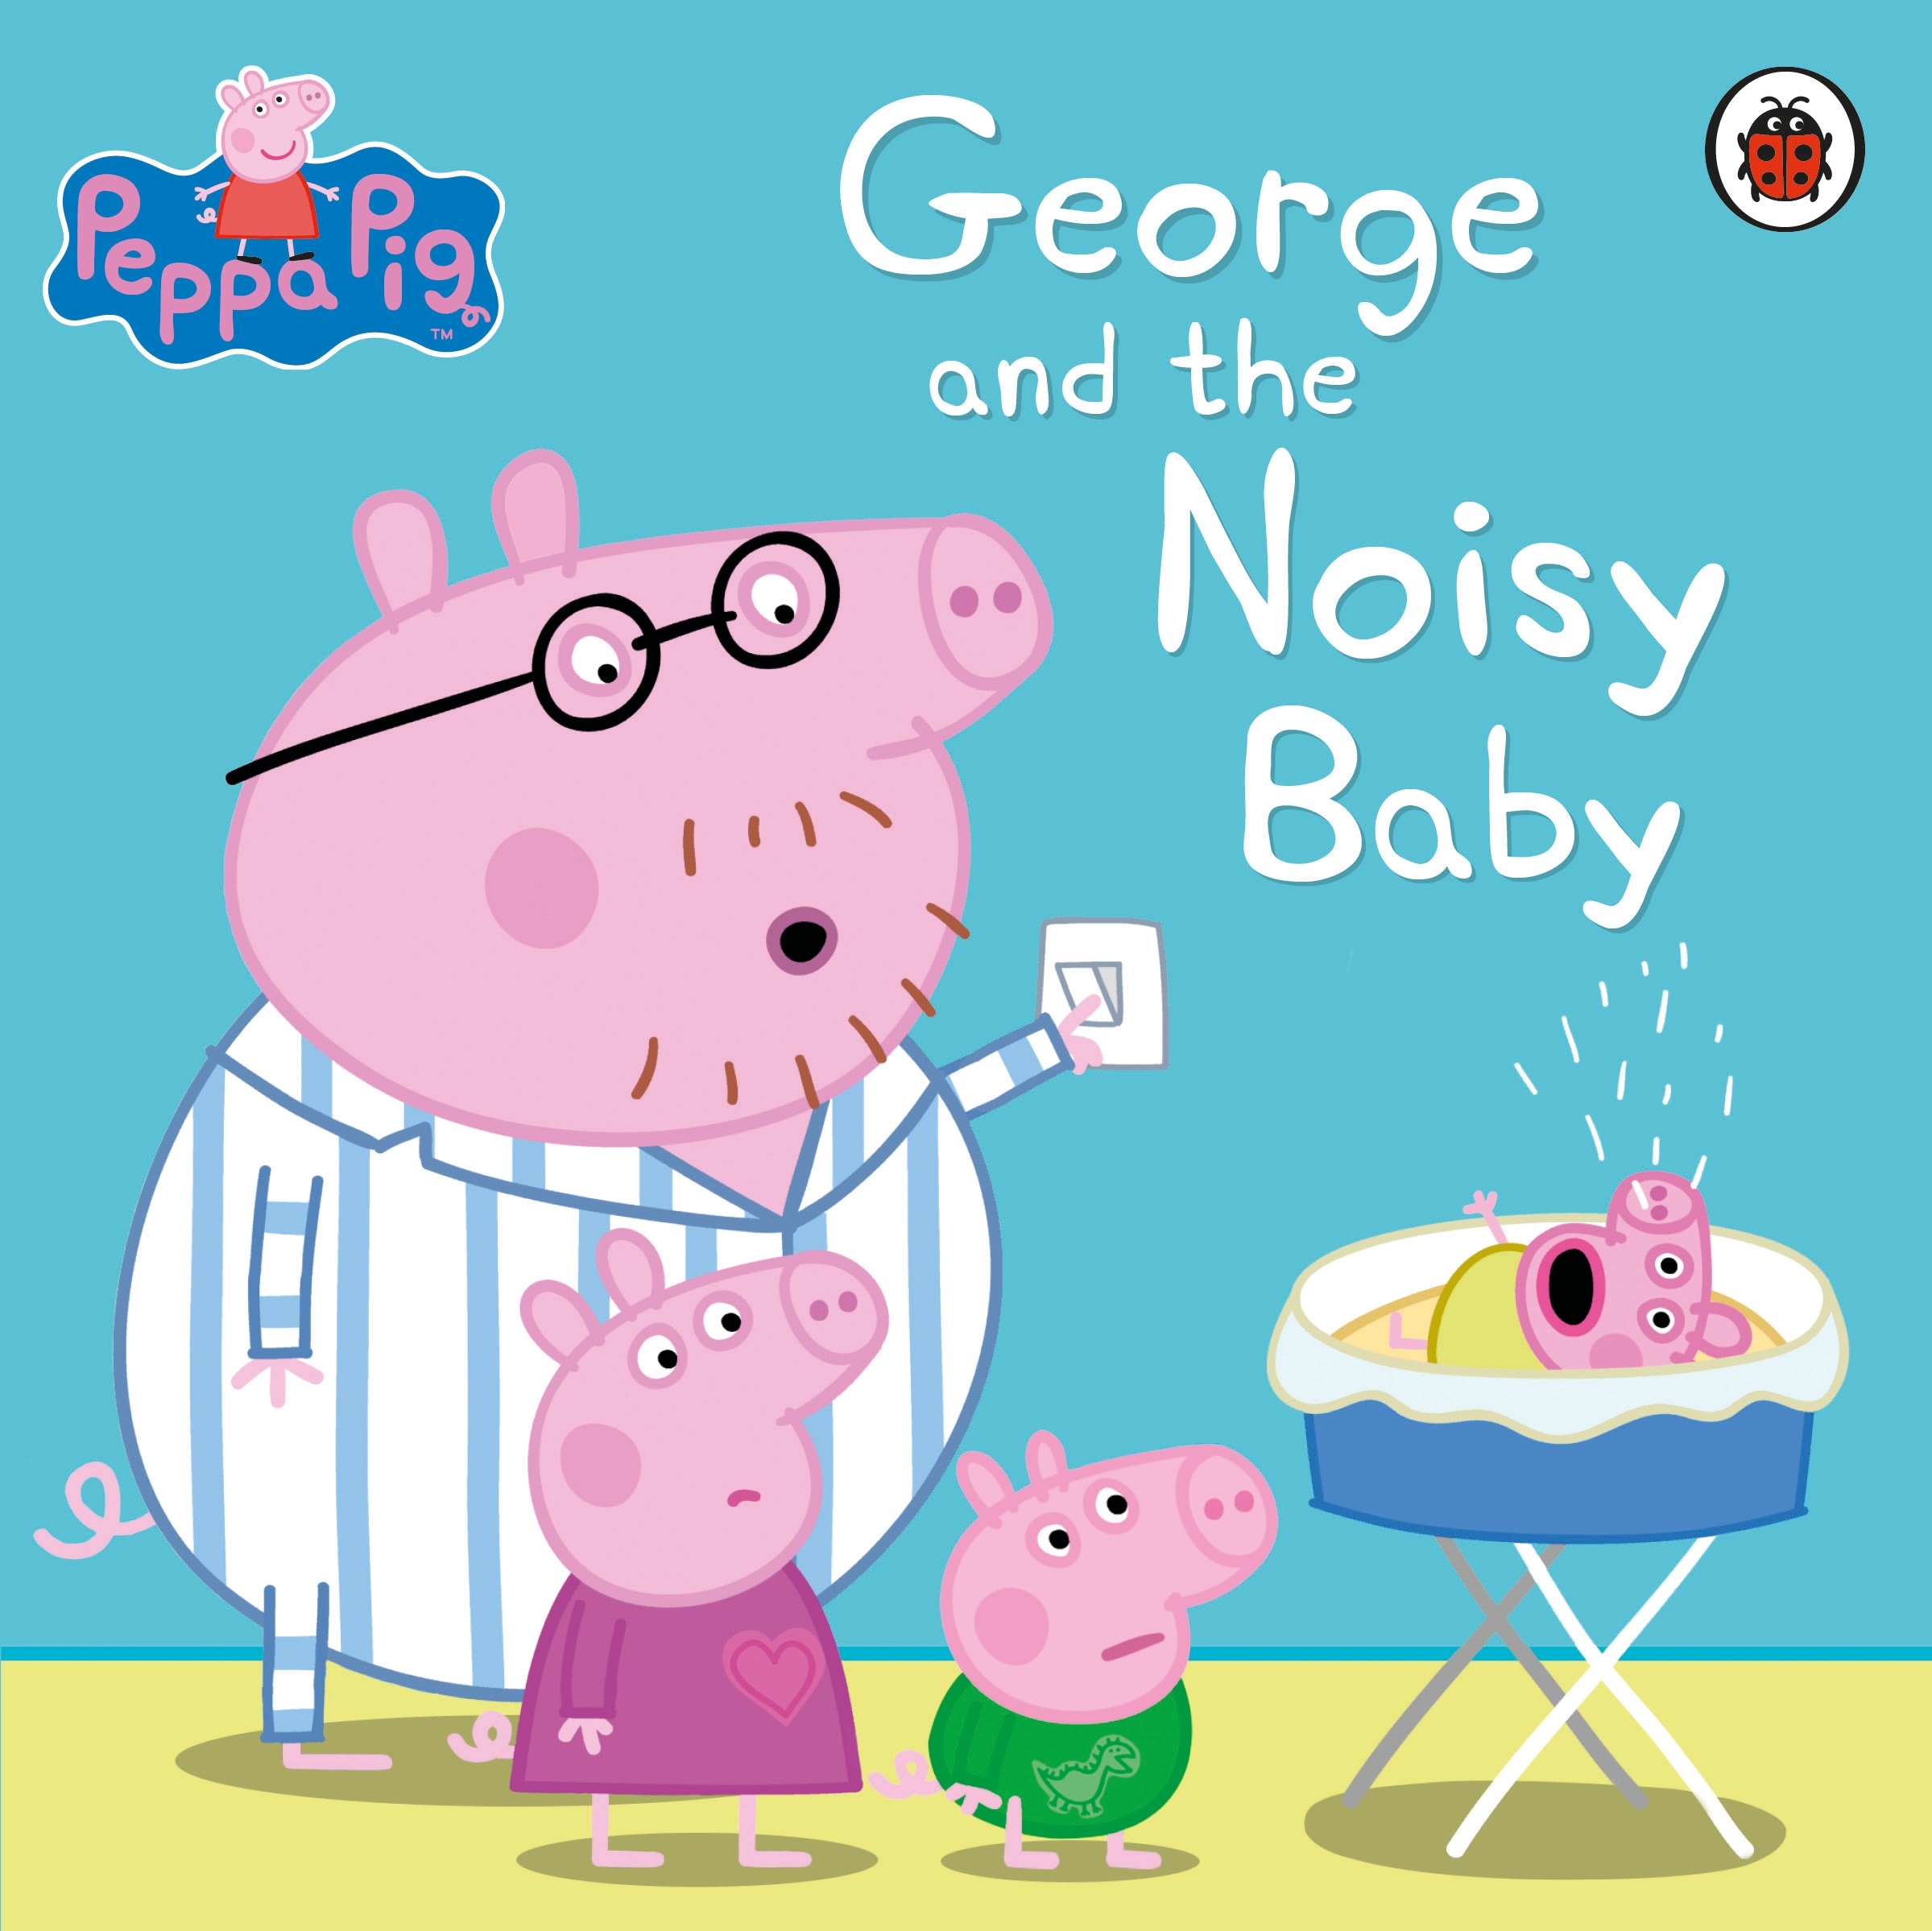 Book “Peppa Pig: George and the Noisy Baby” by Peppa Pig — March 5, 2015